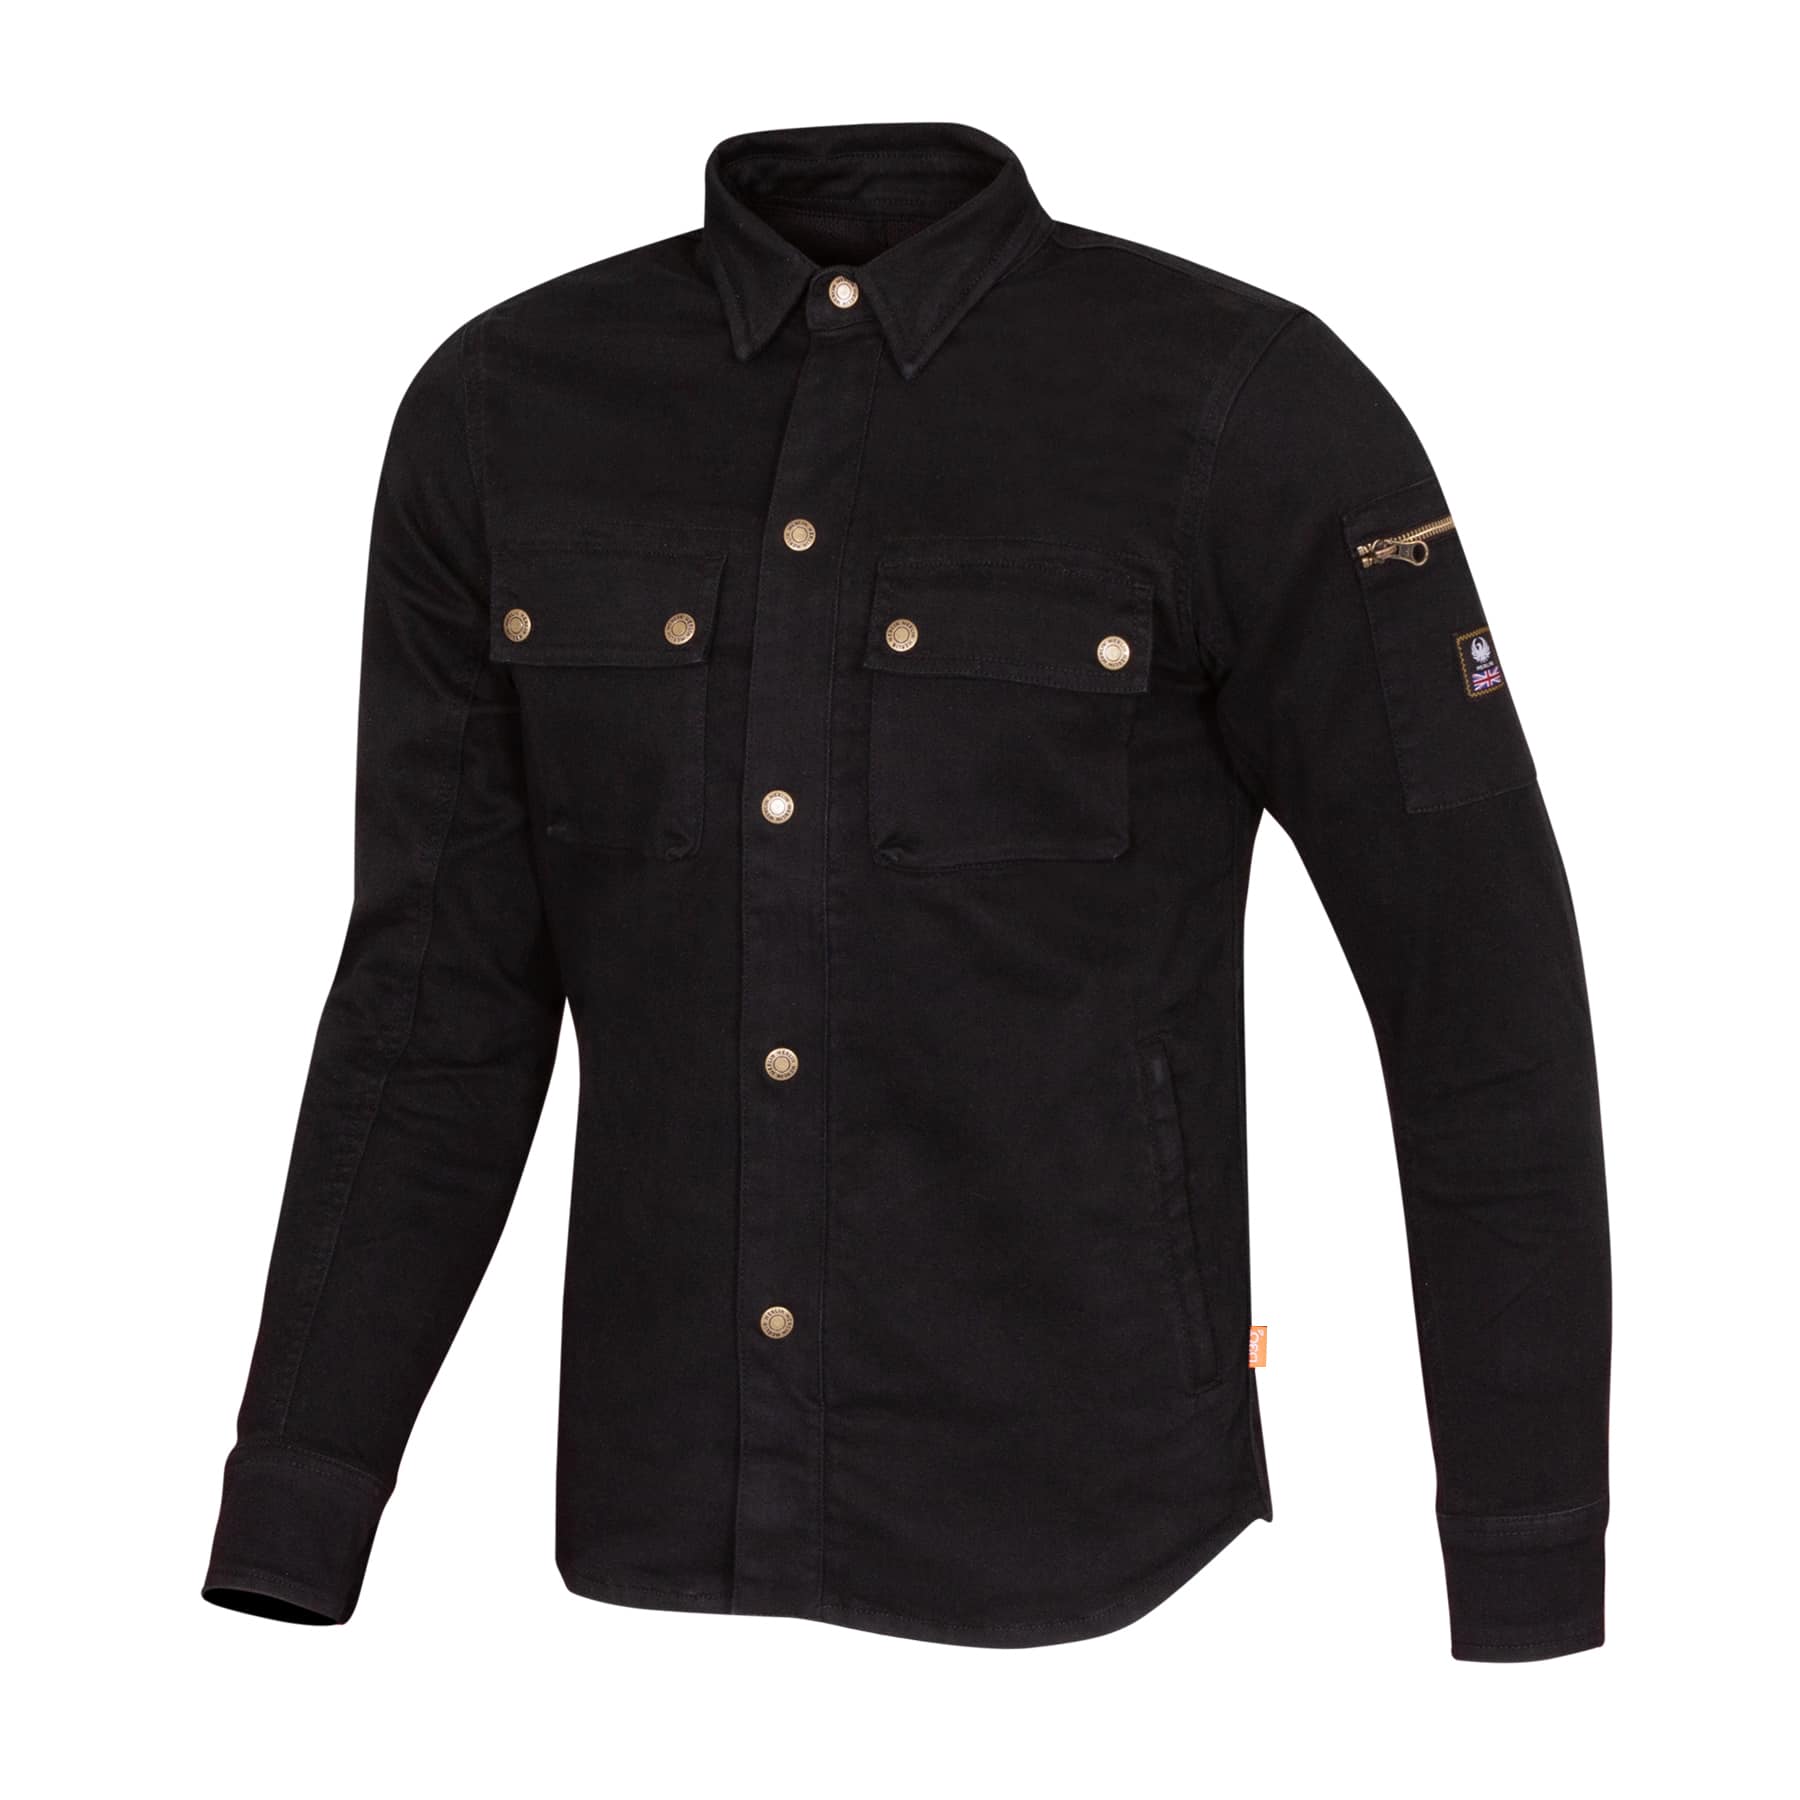 Merlin Brody D3O Single Layer Riding Shirt in black